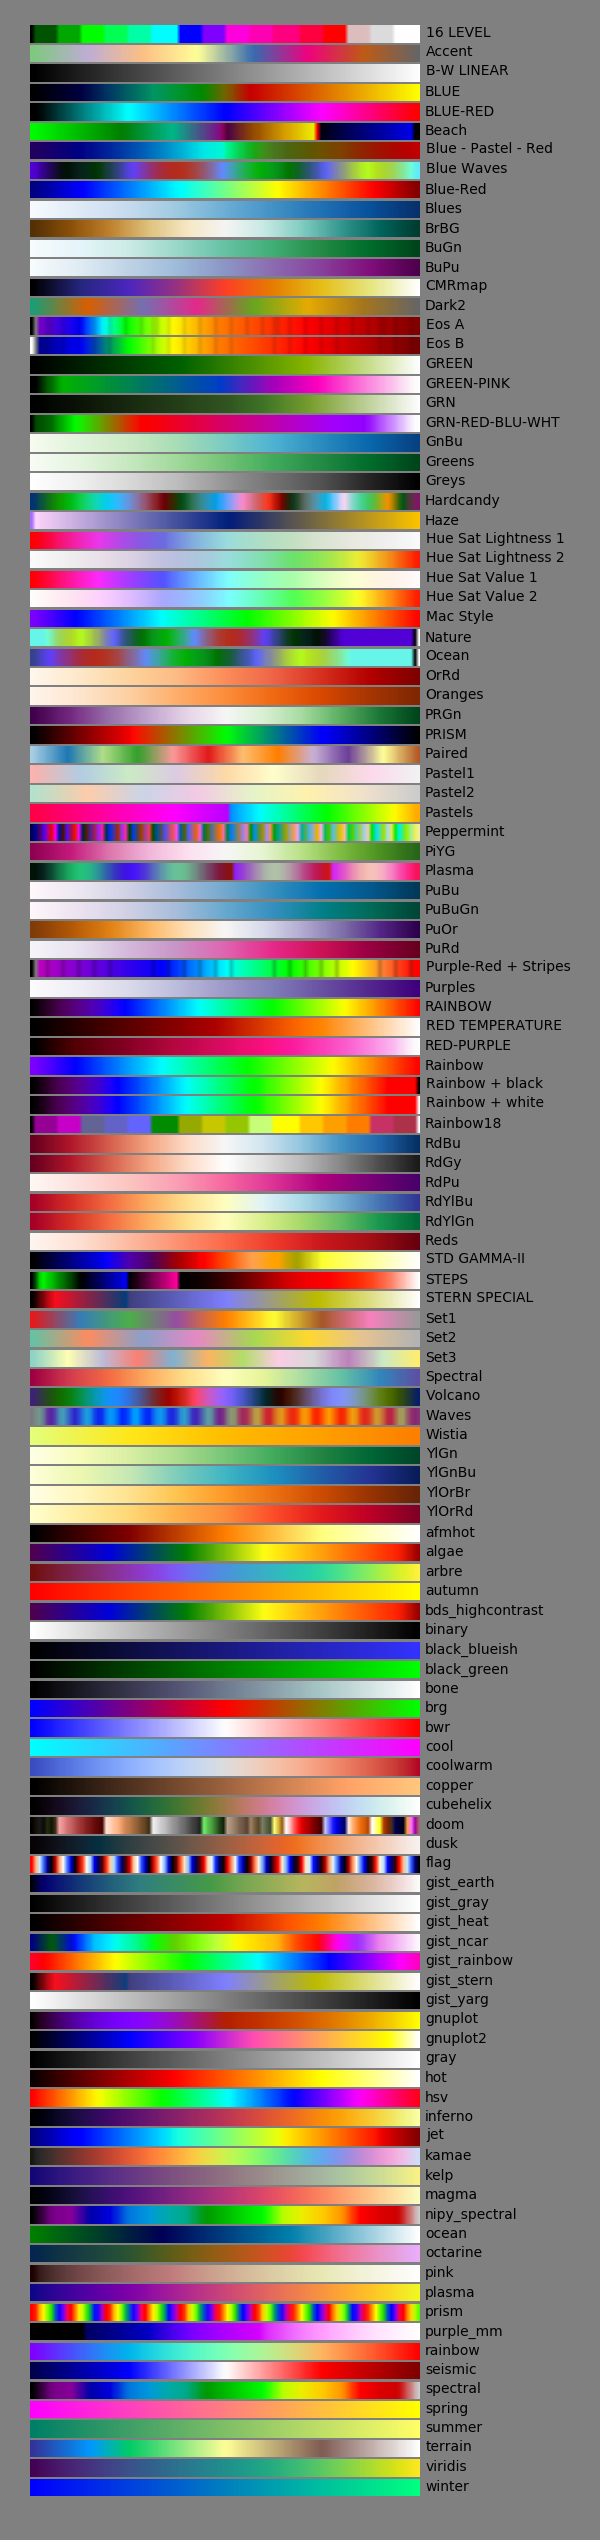 ../../_images/all_colormaps.png